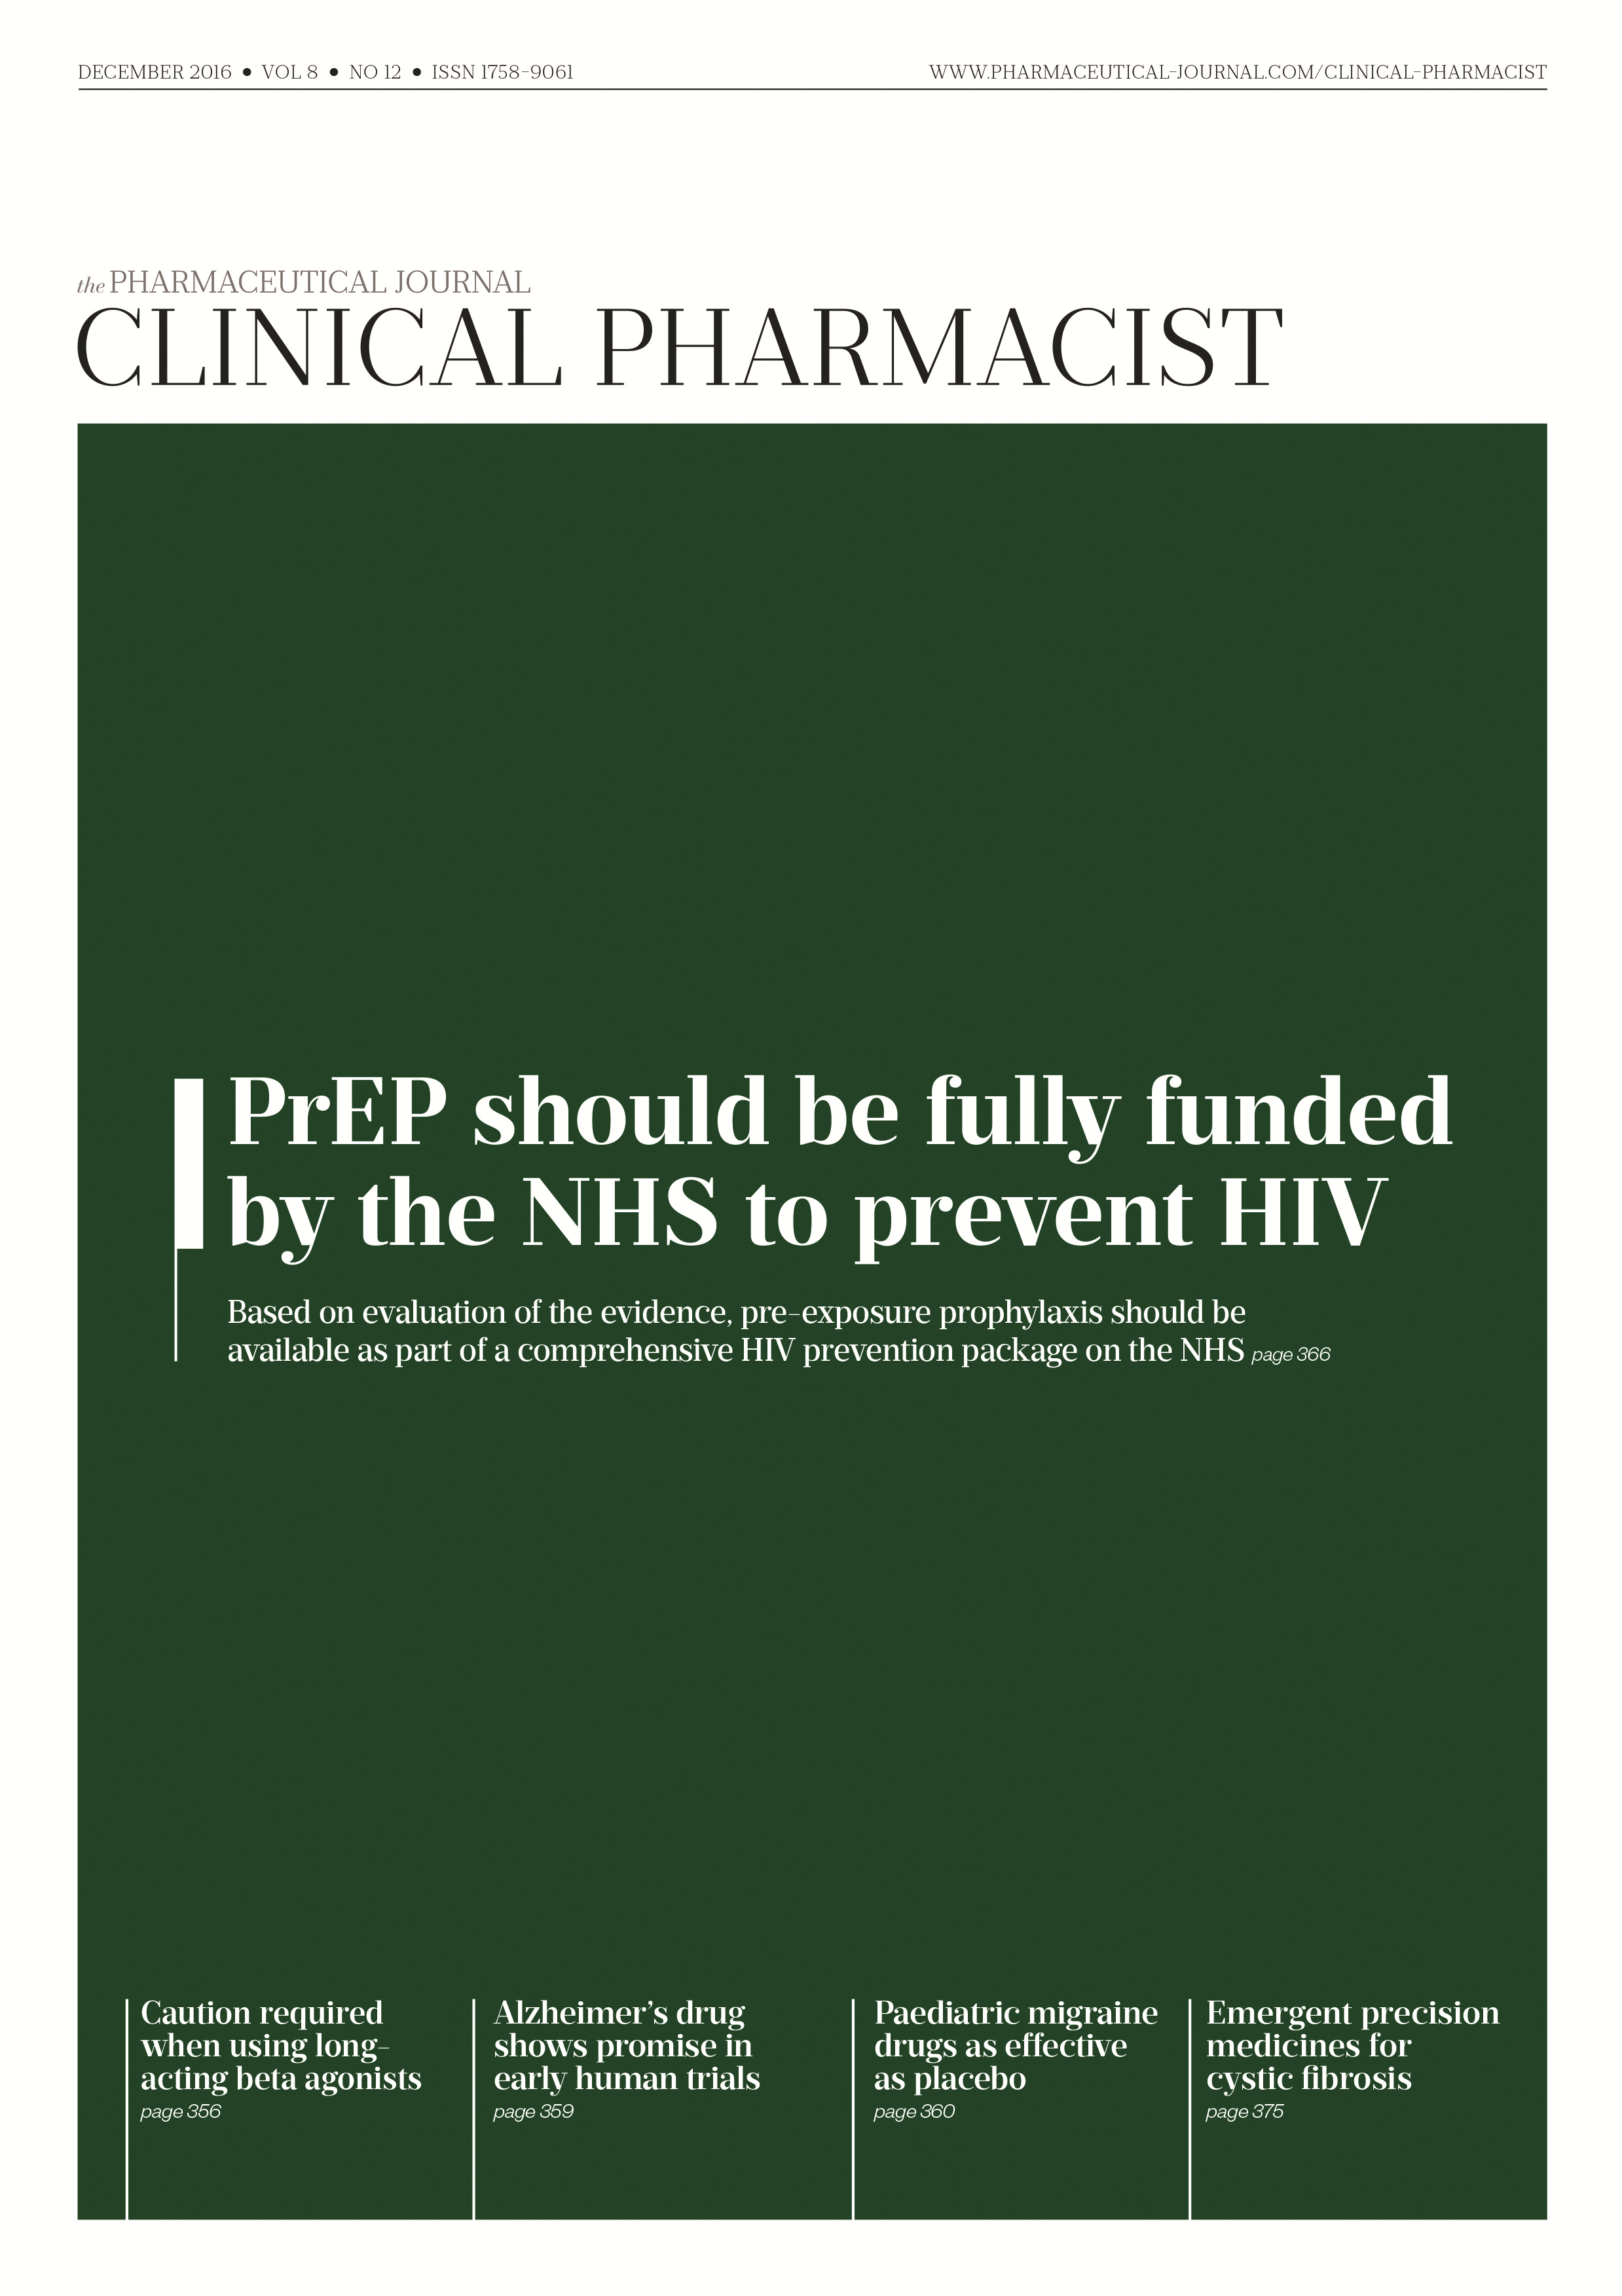 Publication issue cover for CP, December 2016, Vol 8, No 12